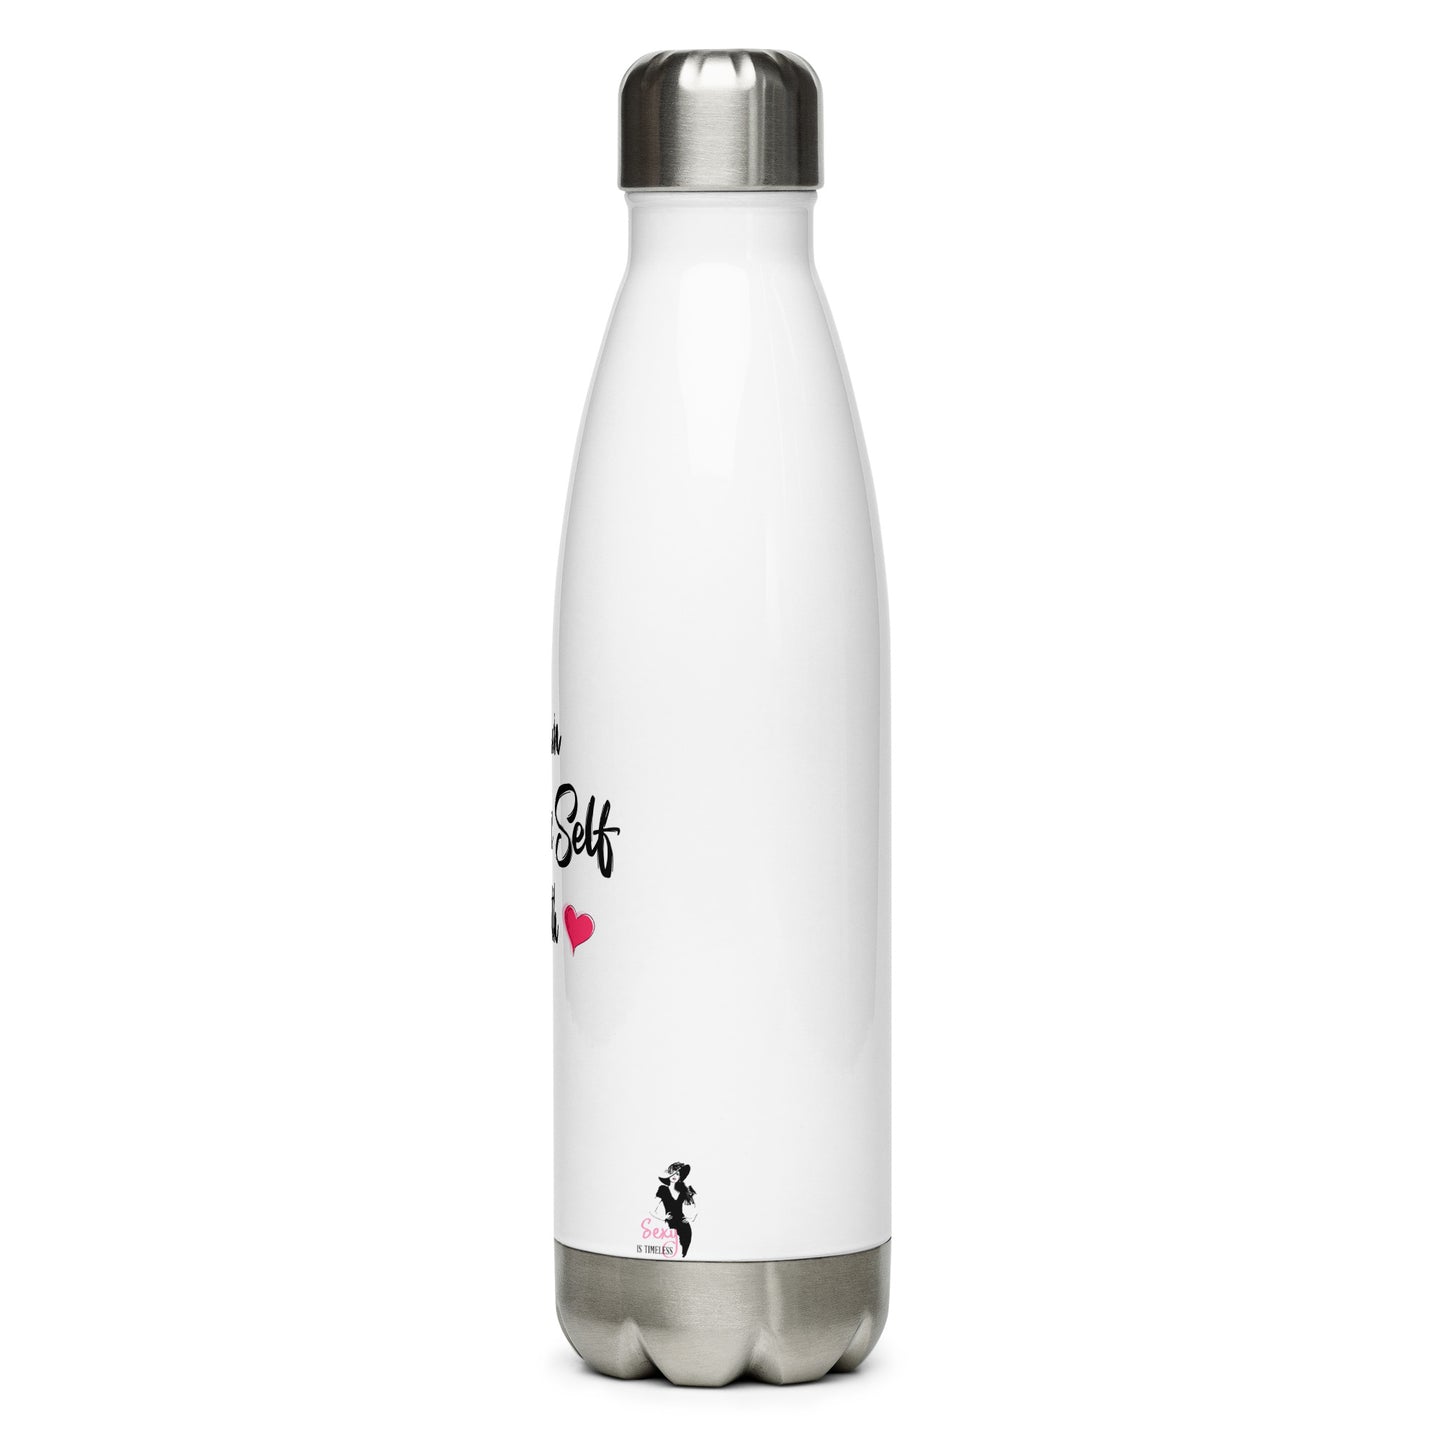 Stainless Steel Water Bottle - Own your self worth